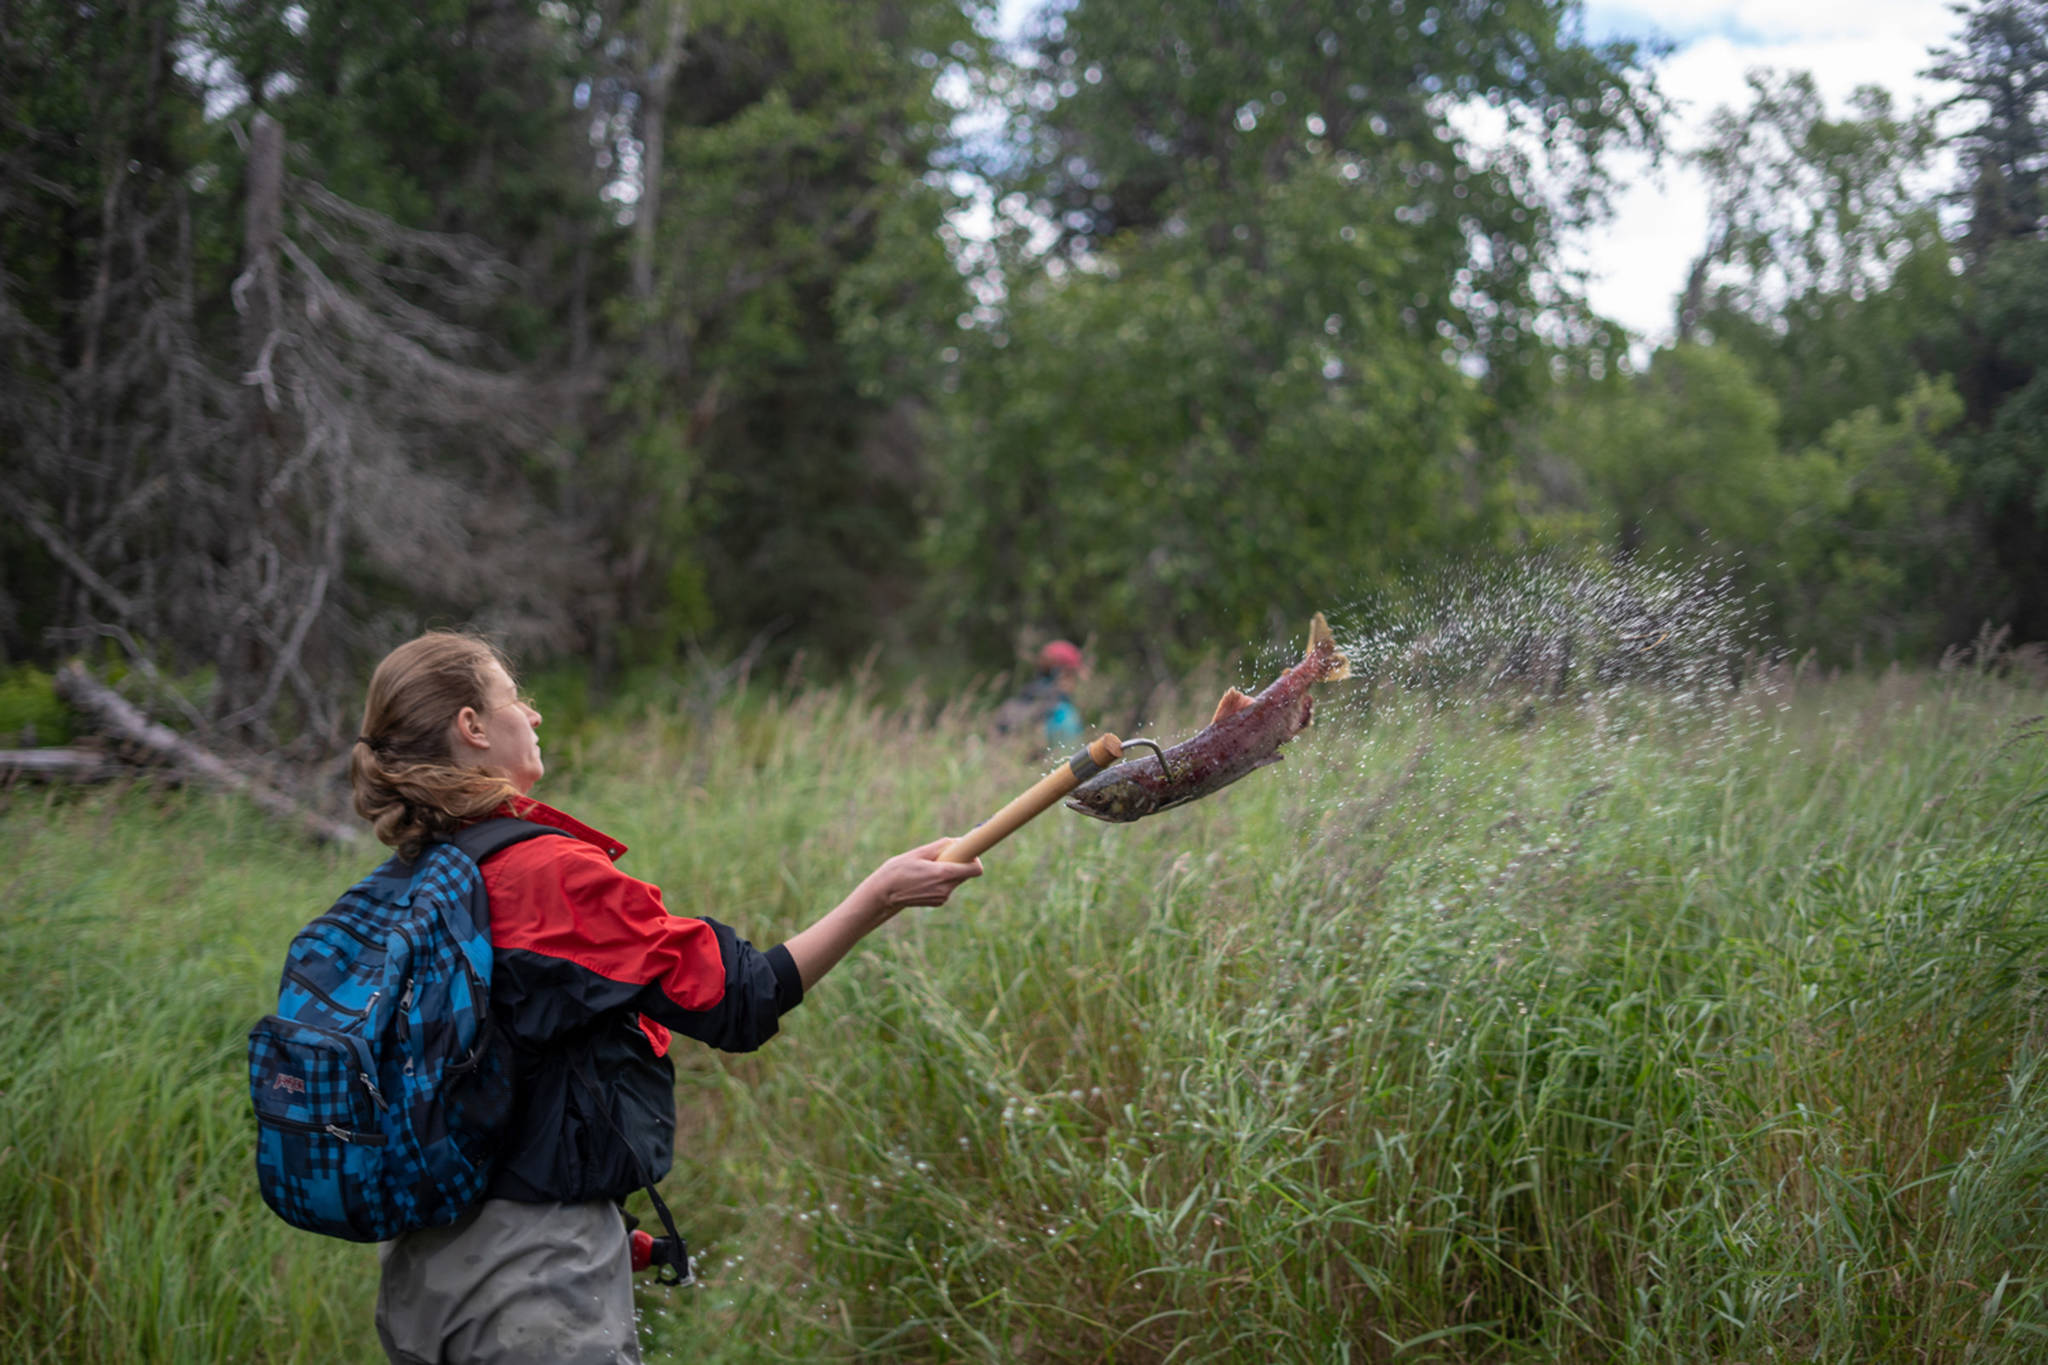 Kyla Bivens, an undergraduate student in the University of Washington School of Aquatic and Fishery Sciences, uses a hooked pole to throw a dead sockeye salmon onto the bank of Hansen Creek in southwest Alaska in August 2018. (Courtesy Photo | Dan DiNicola via University of Washington)